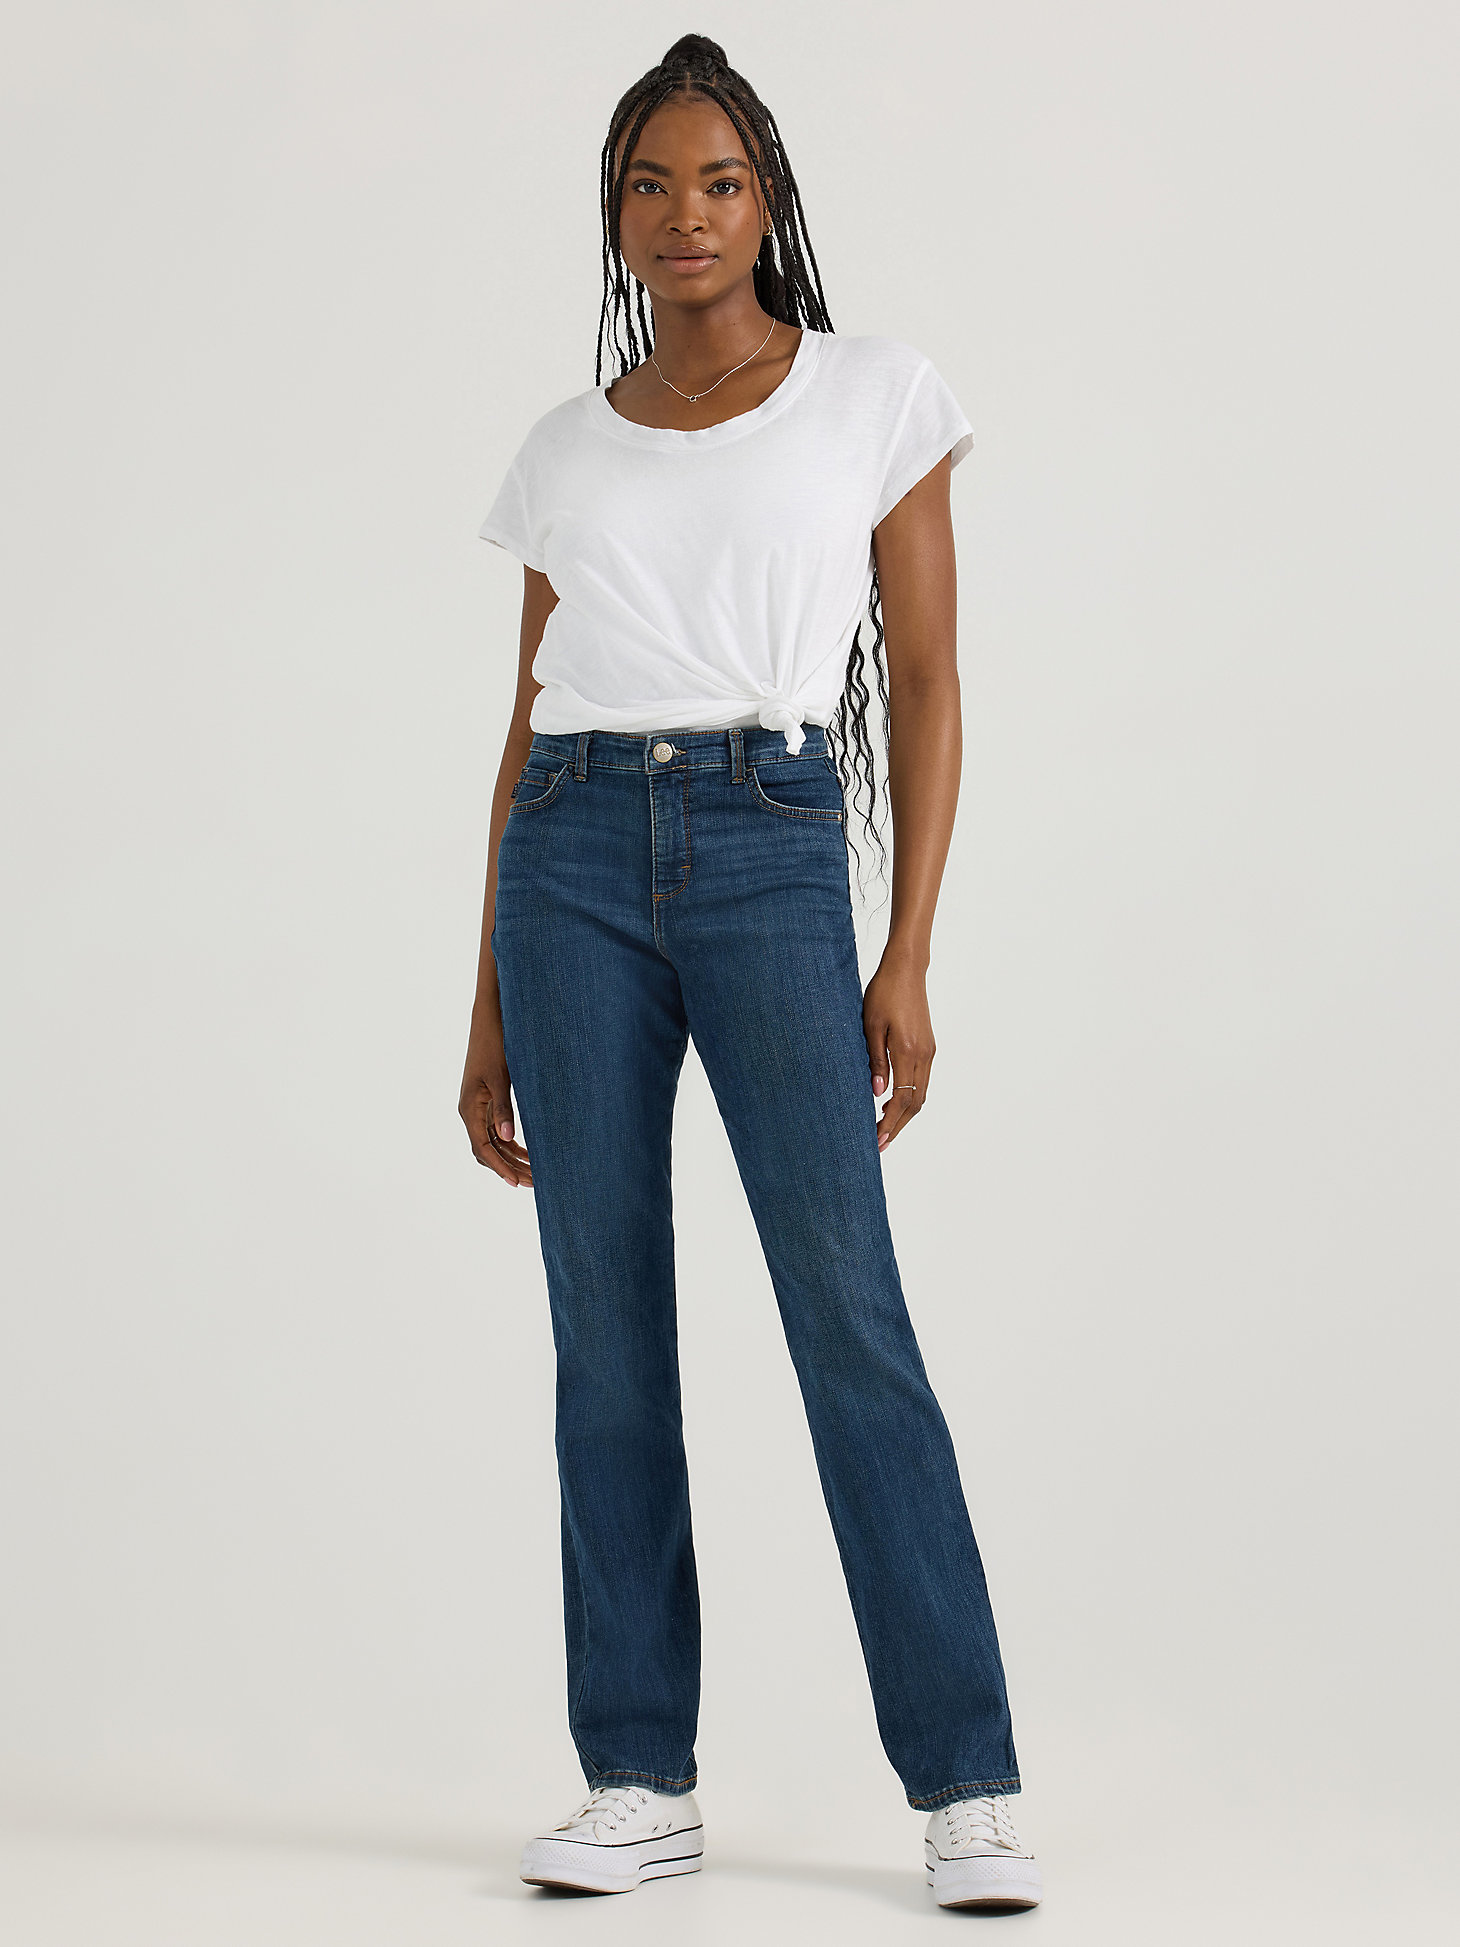 Women’s Instantly Slims Relaxed Fit Straight Leg Jean Classic Fit in Ellis alternative view 1